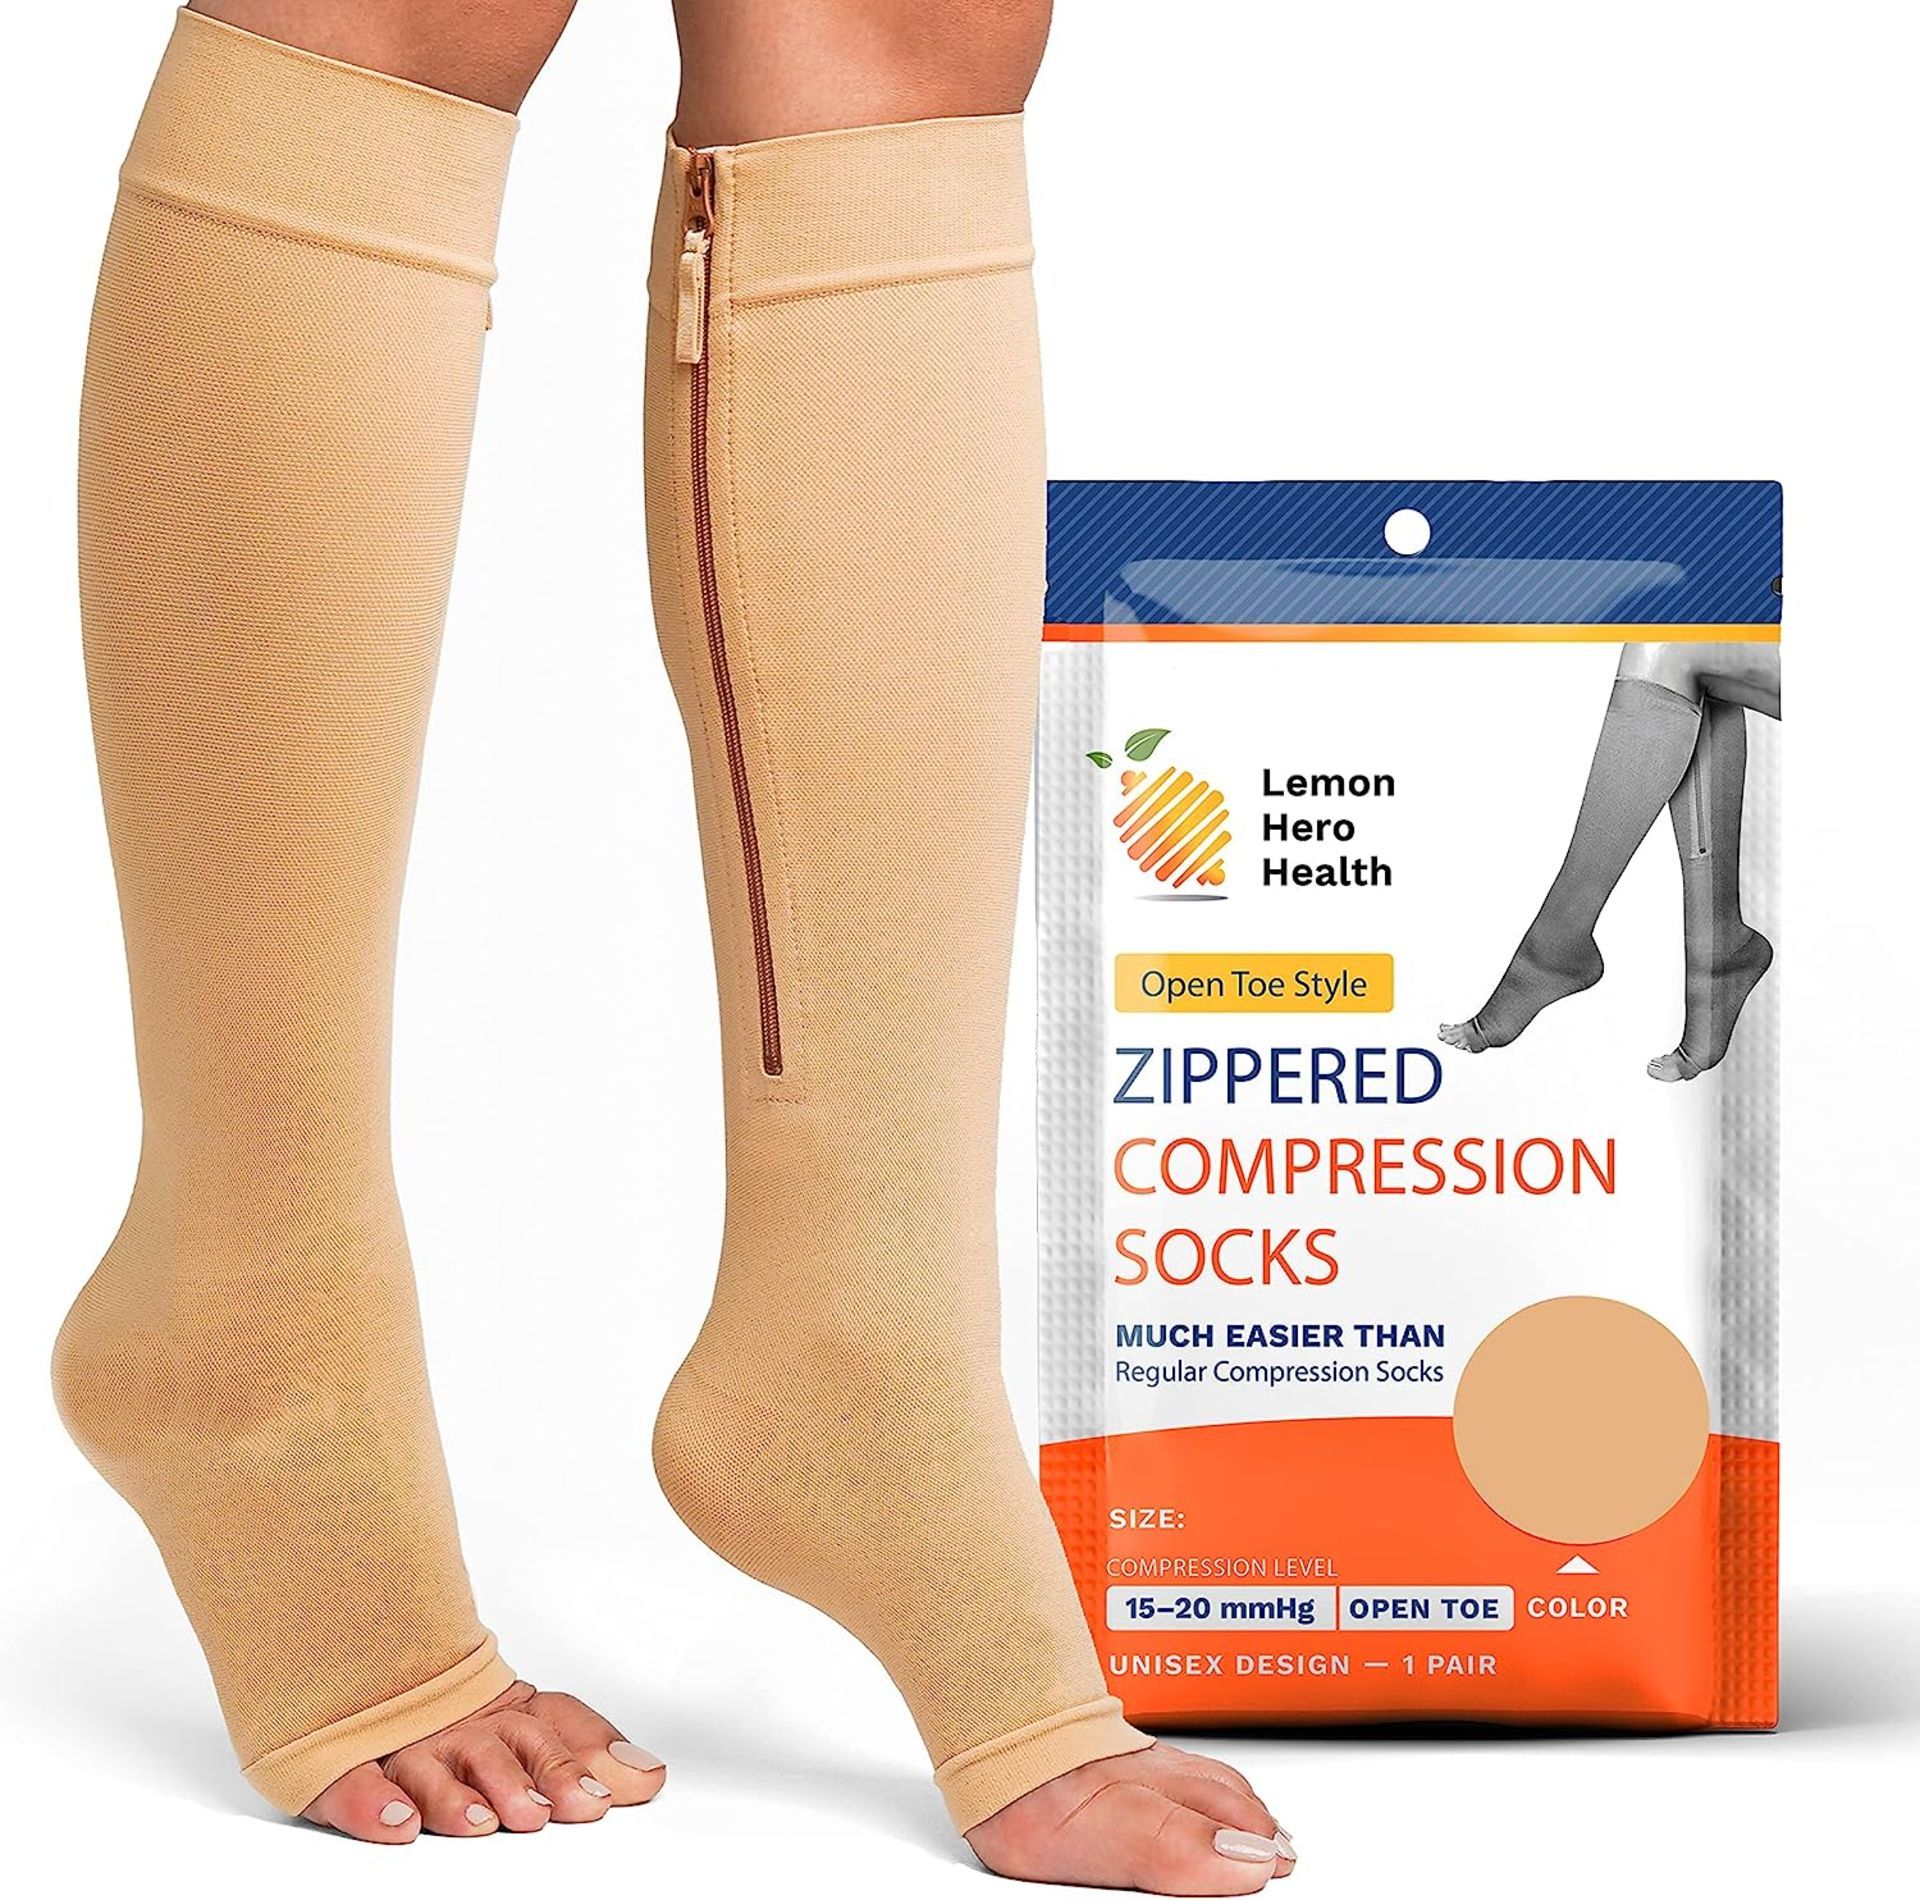 30 X BRAND NEW PAIRS OF ZIPPERED OPEN TOE COMPRESSION SOCK SIZE 4XL R16-5